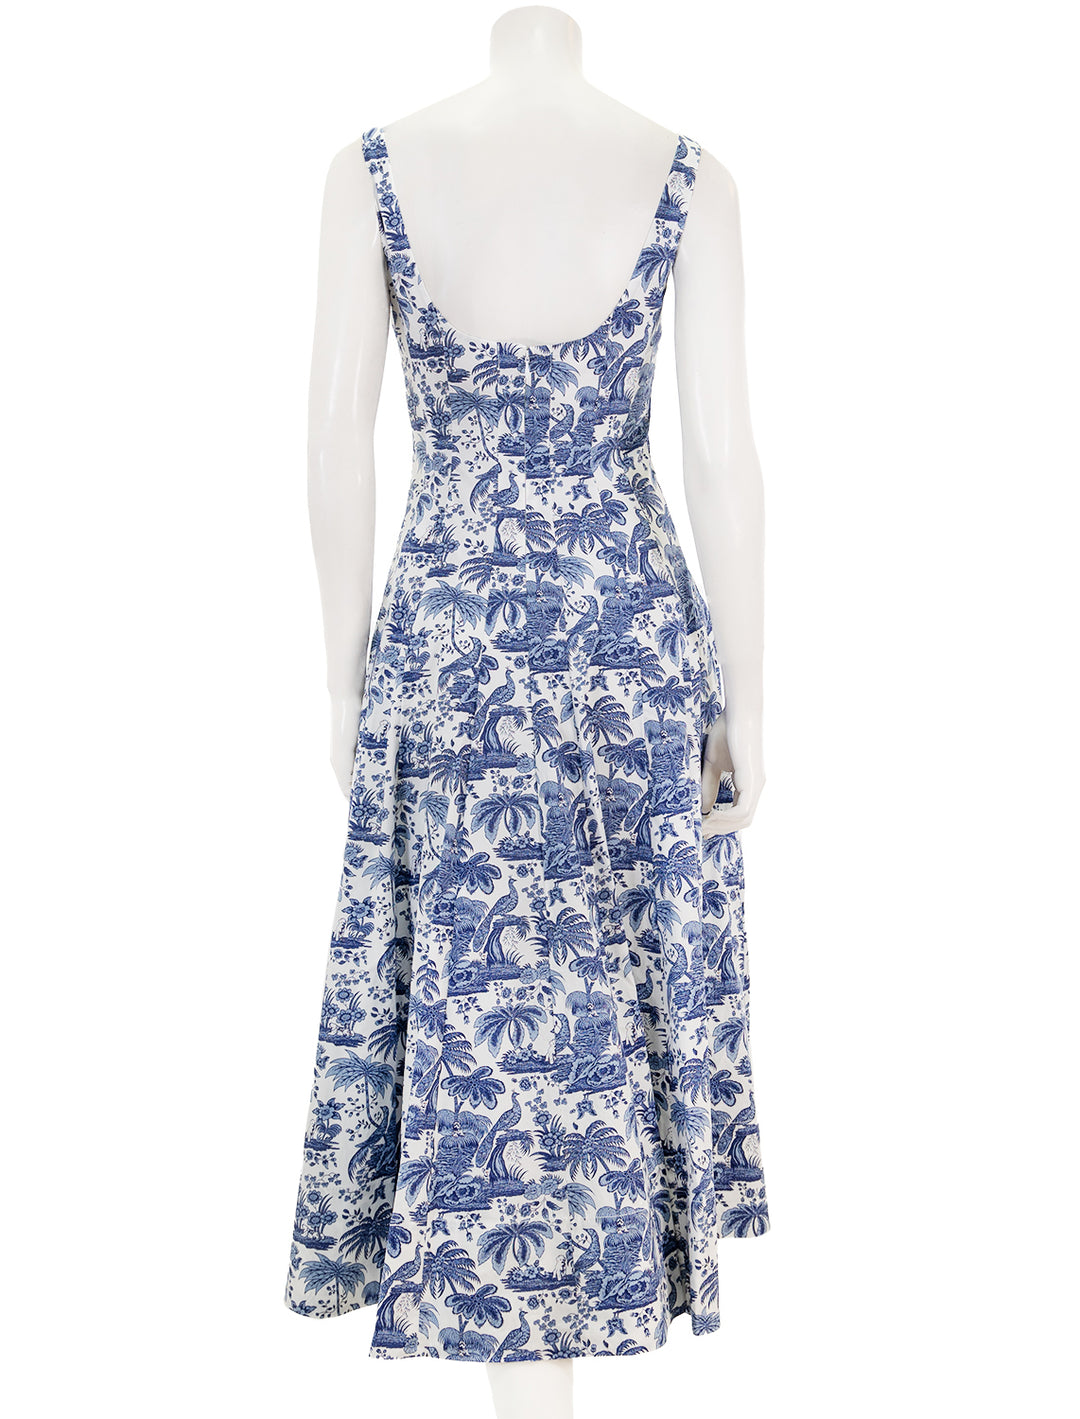 Back view of STAUD's wells dress in china blue toile.